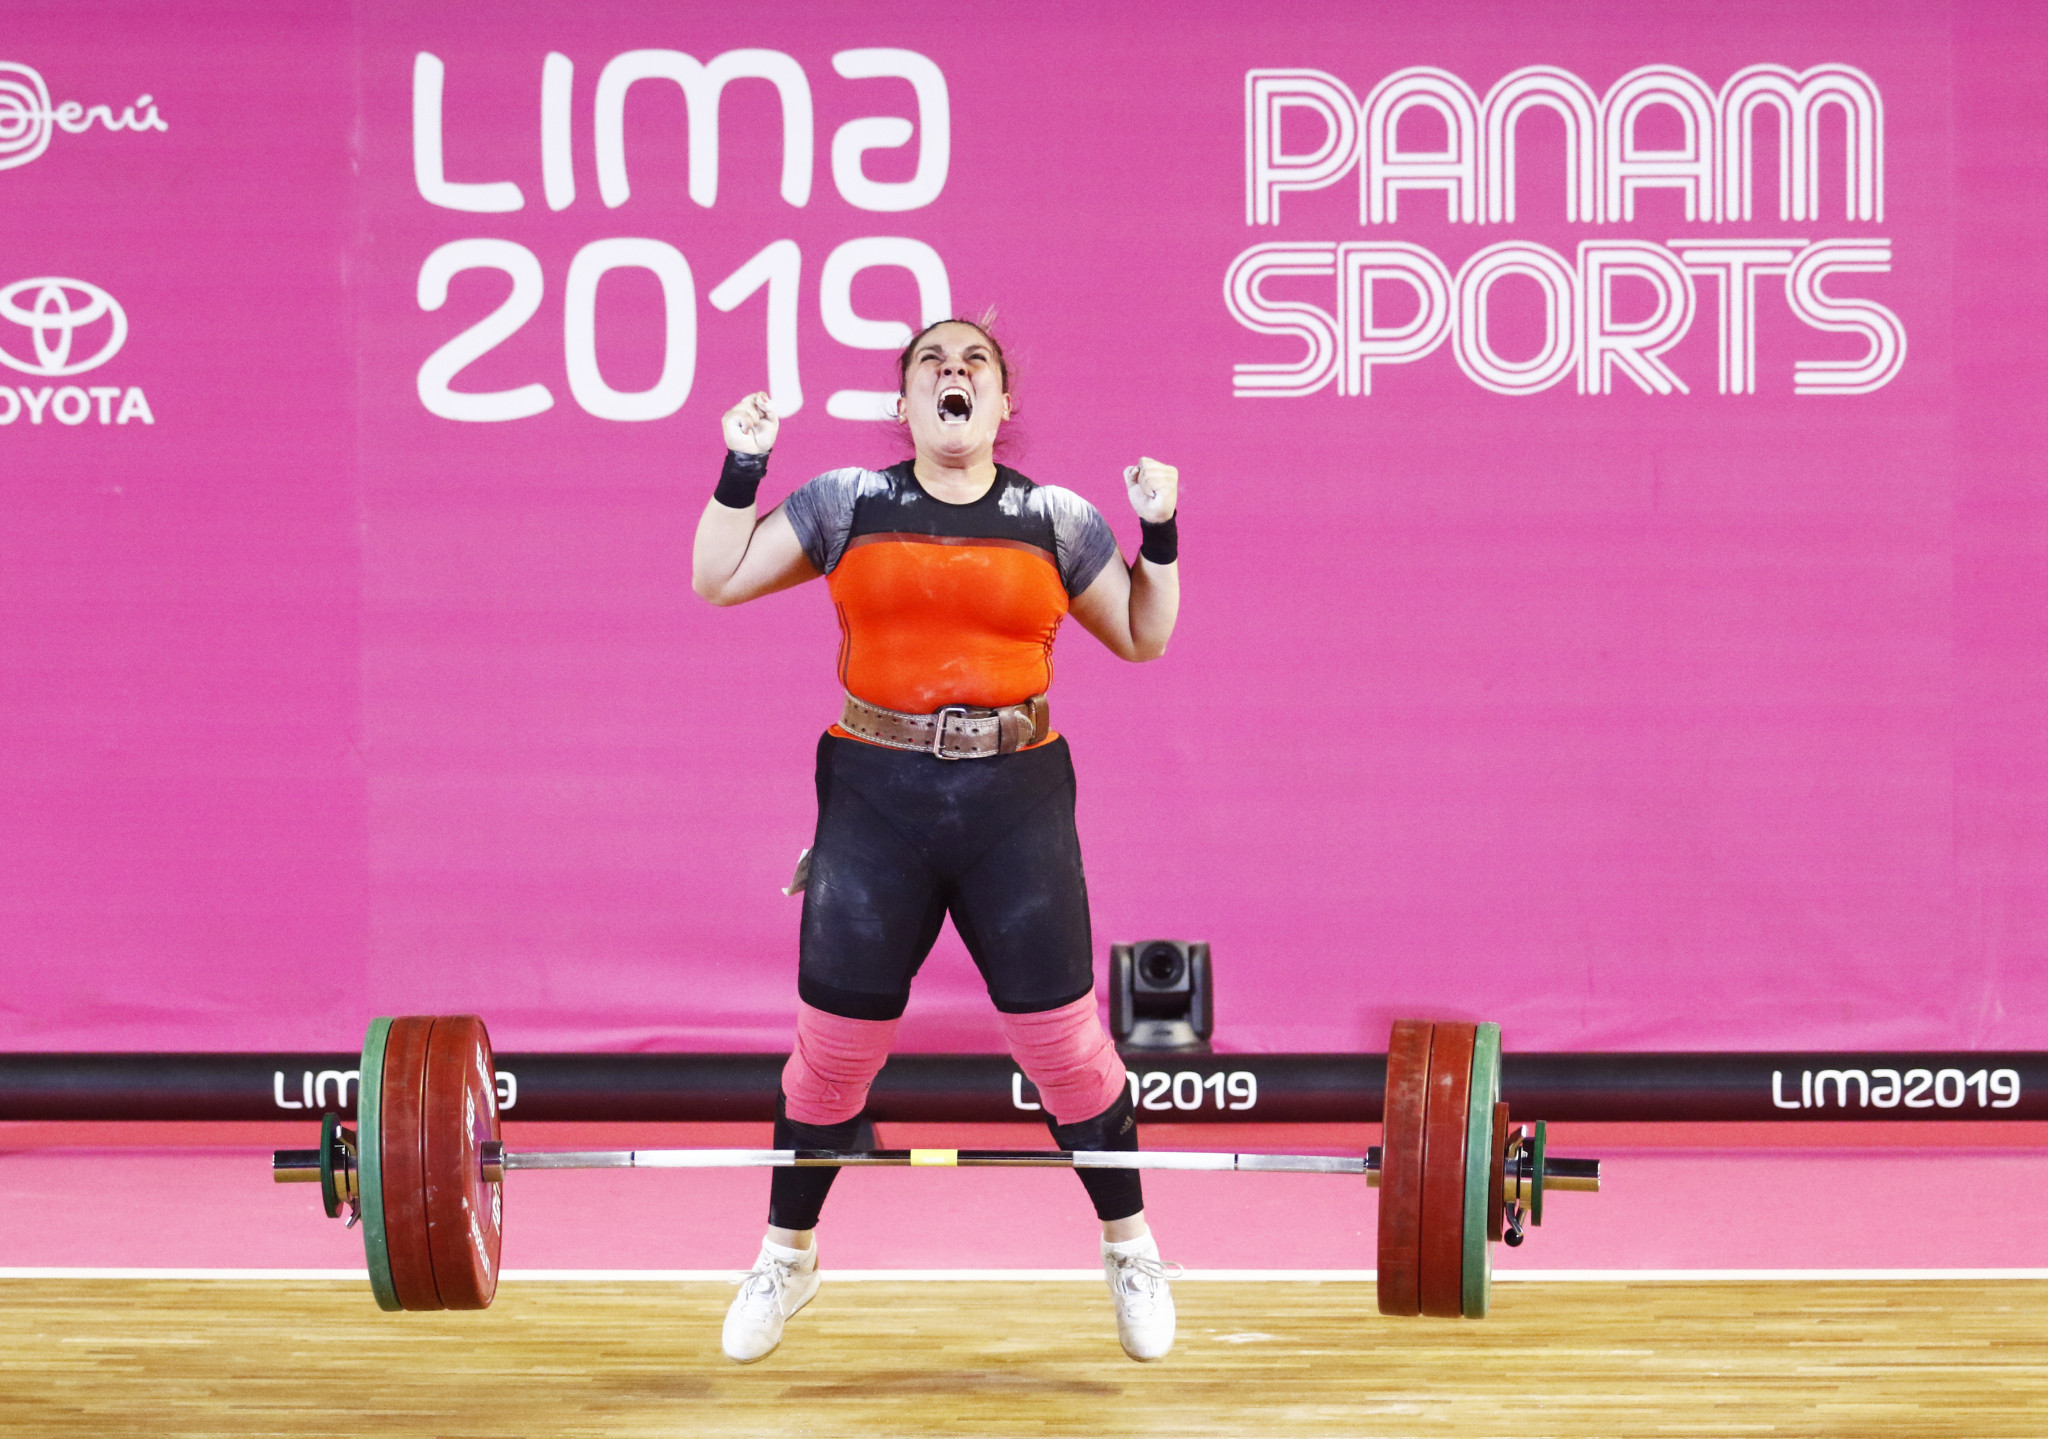 Chile enjoyed a fruitful day, with Maria Fernanda Valdes of Chile winning the women's 87kg weightlifting event ©Lima 2019